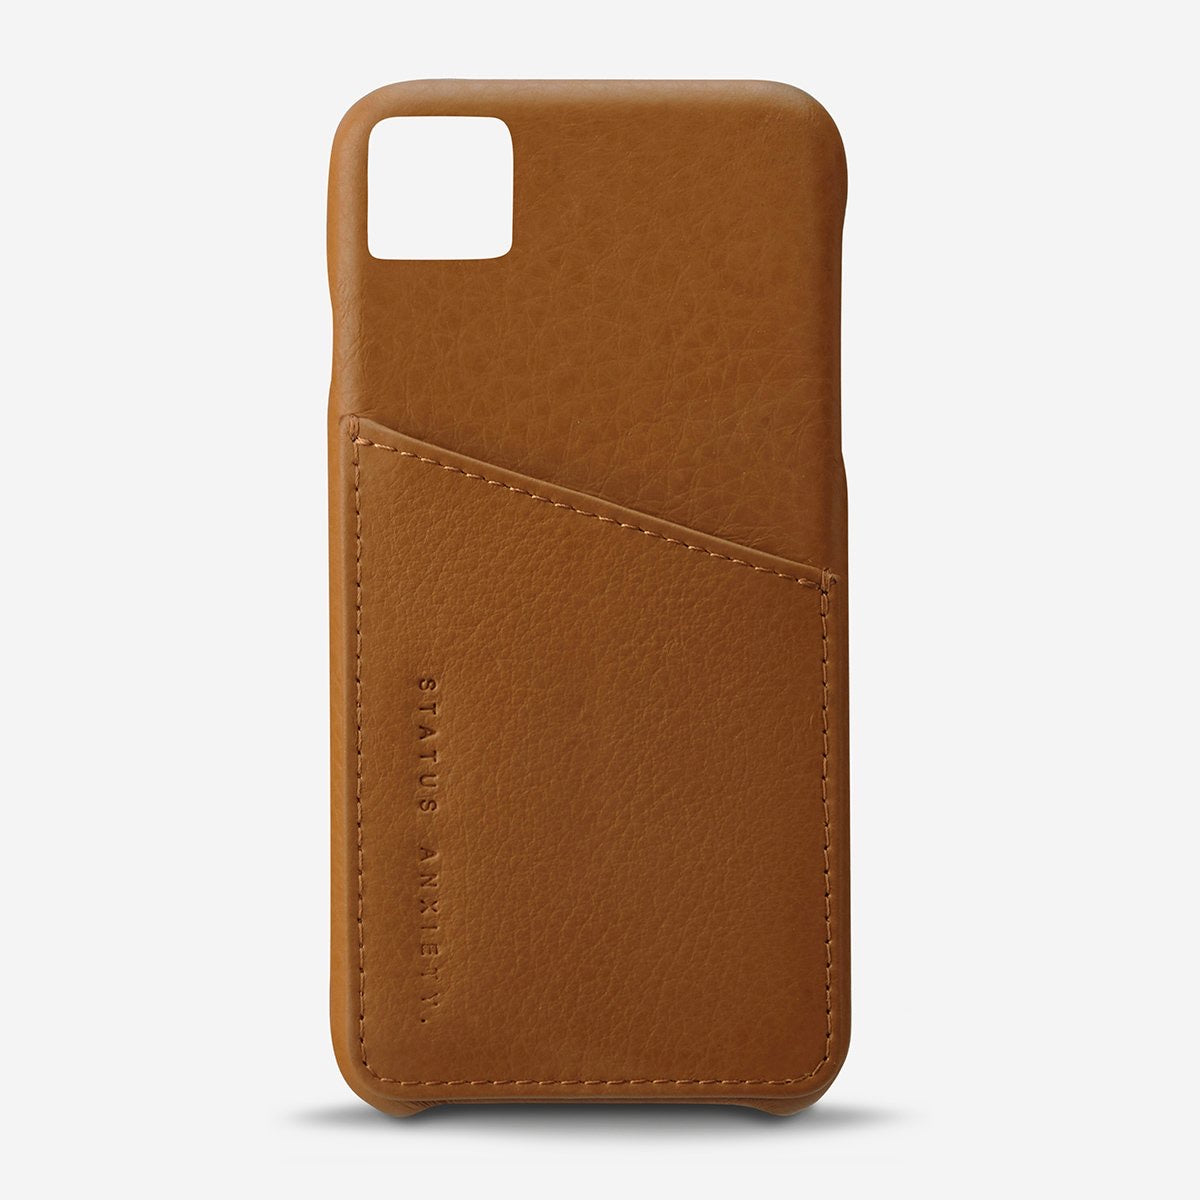 Leather iPhone Cover 11 Pro  - Tan